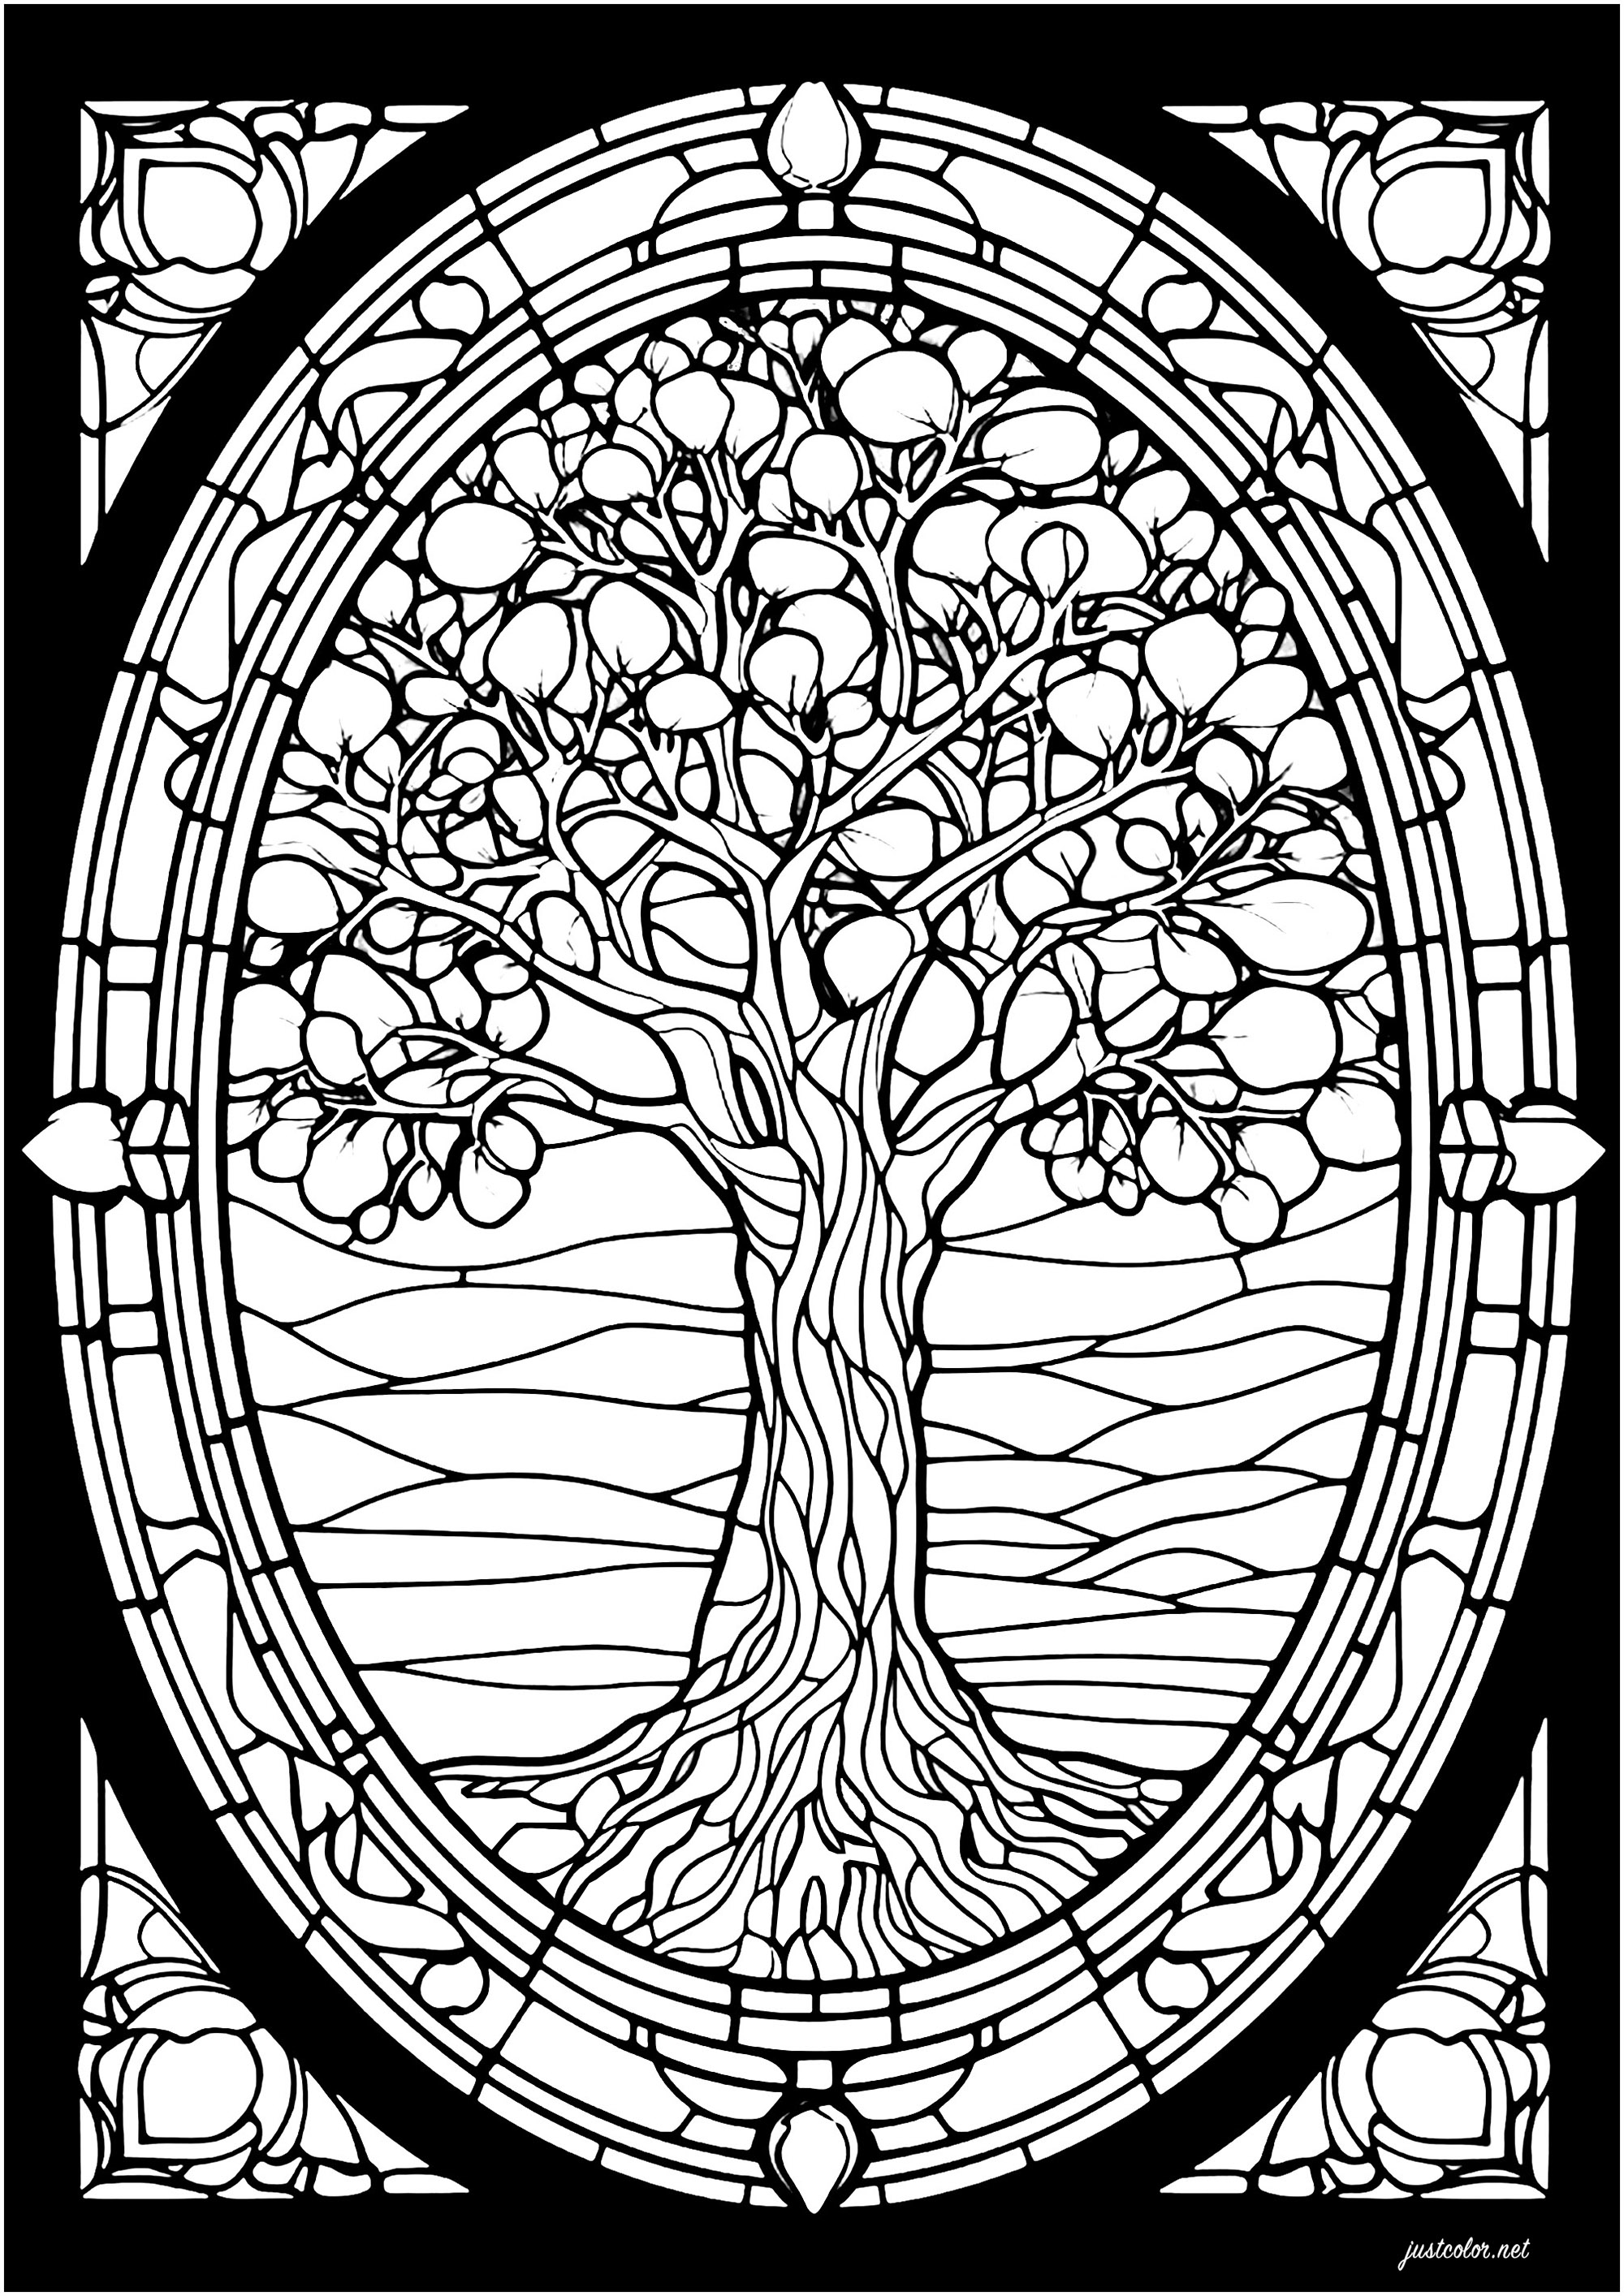 Stained glass tree. A majestic tree with intricate patterns to color